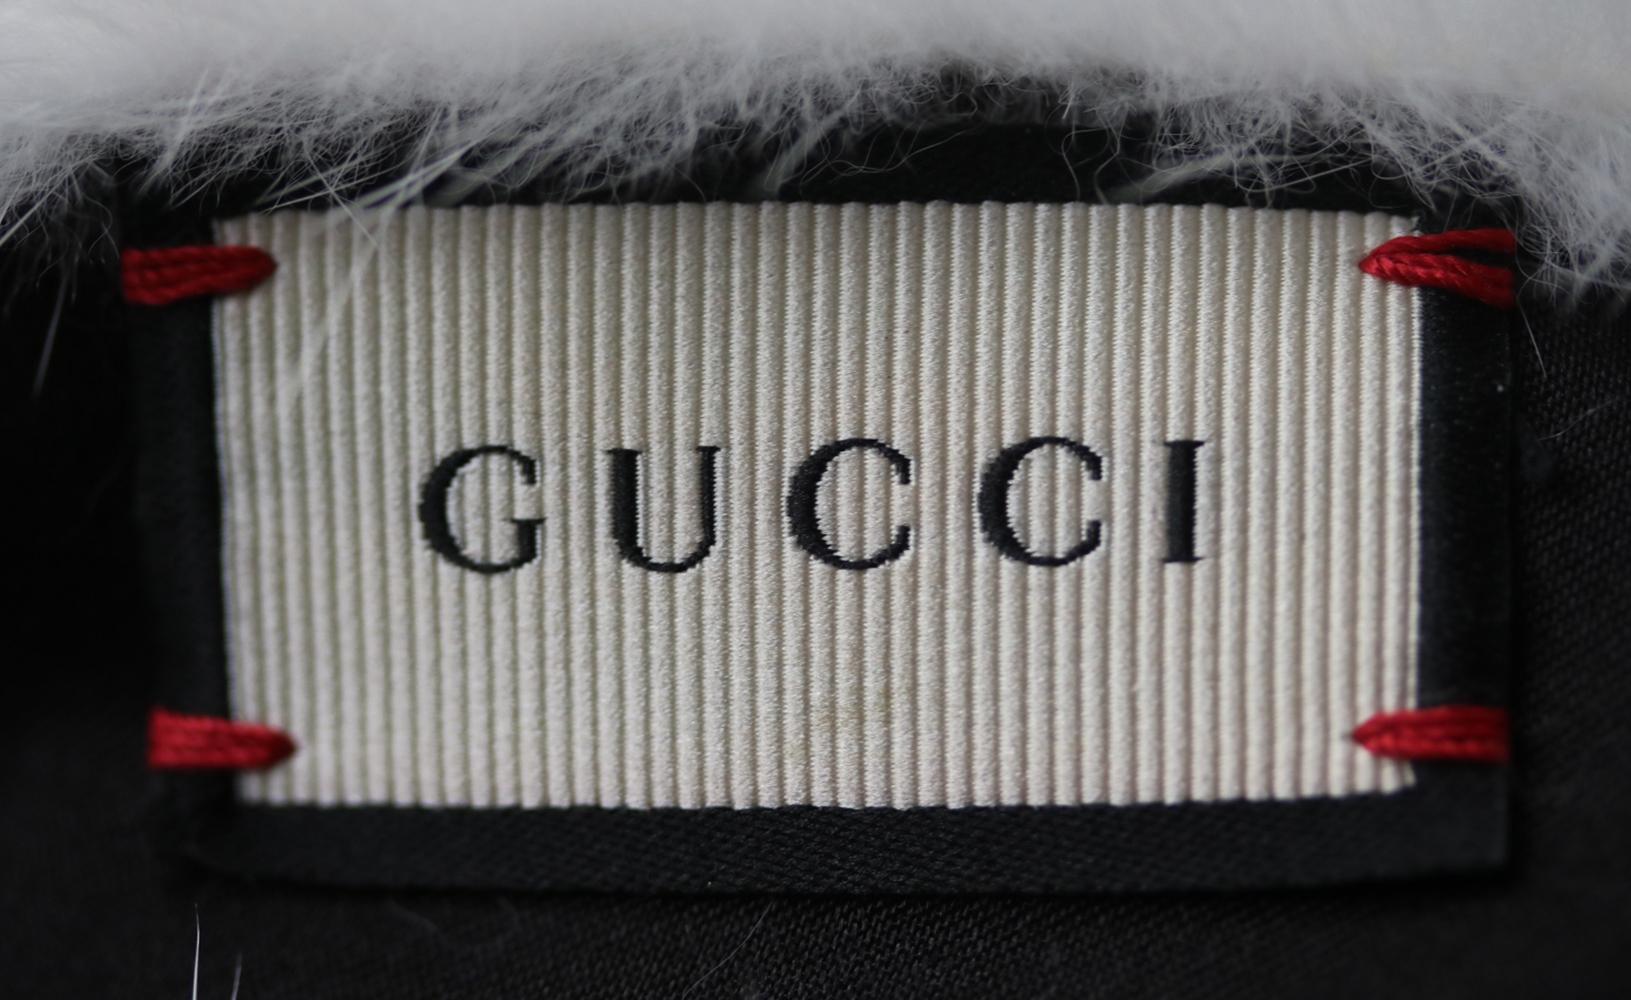 Gucci's white mink-fur twist-front headband is crafted with an elasticated black silk panel for a snug and secure fit. It's crafted in Italy, and will work well with the label's eclectic printed pieces. Snow-white twist-front panels. Gathered